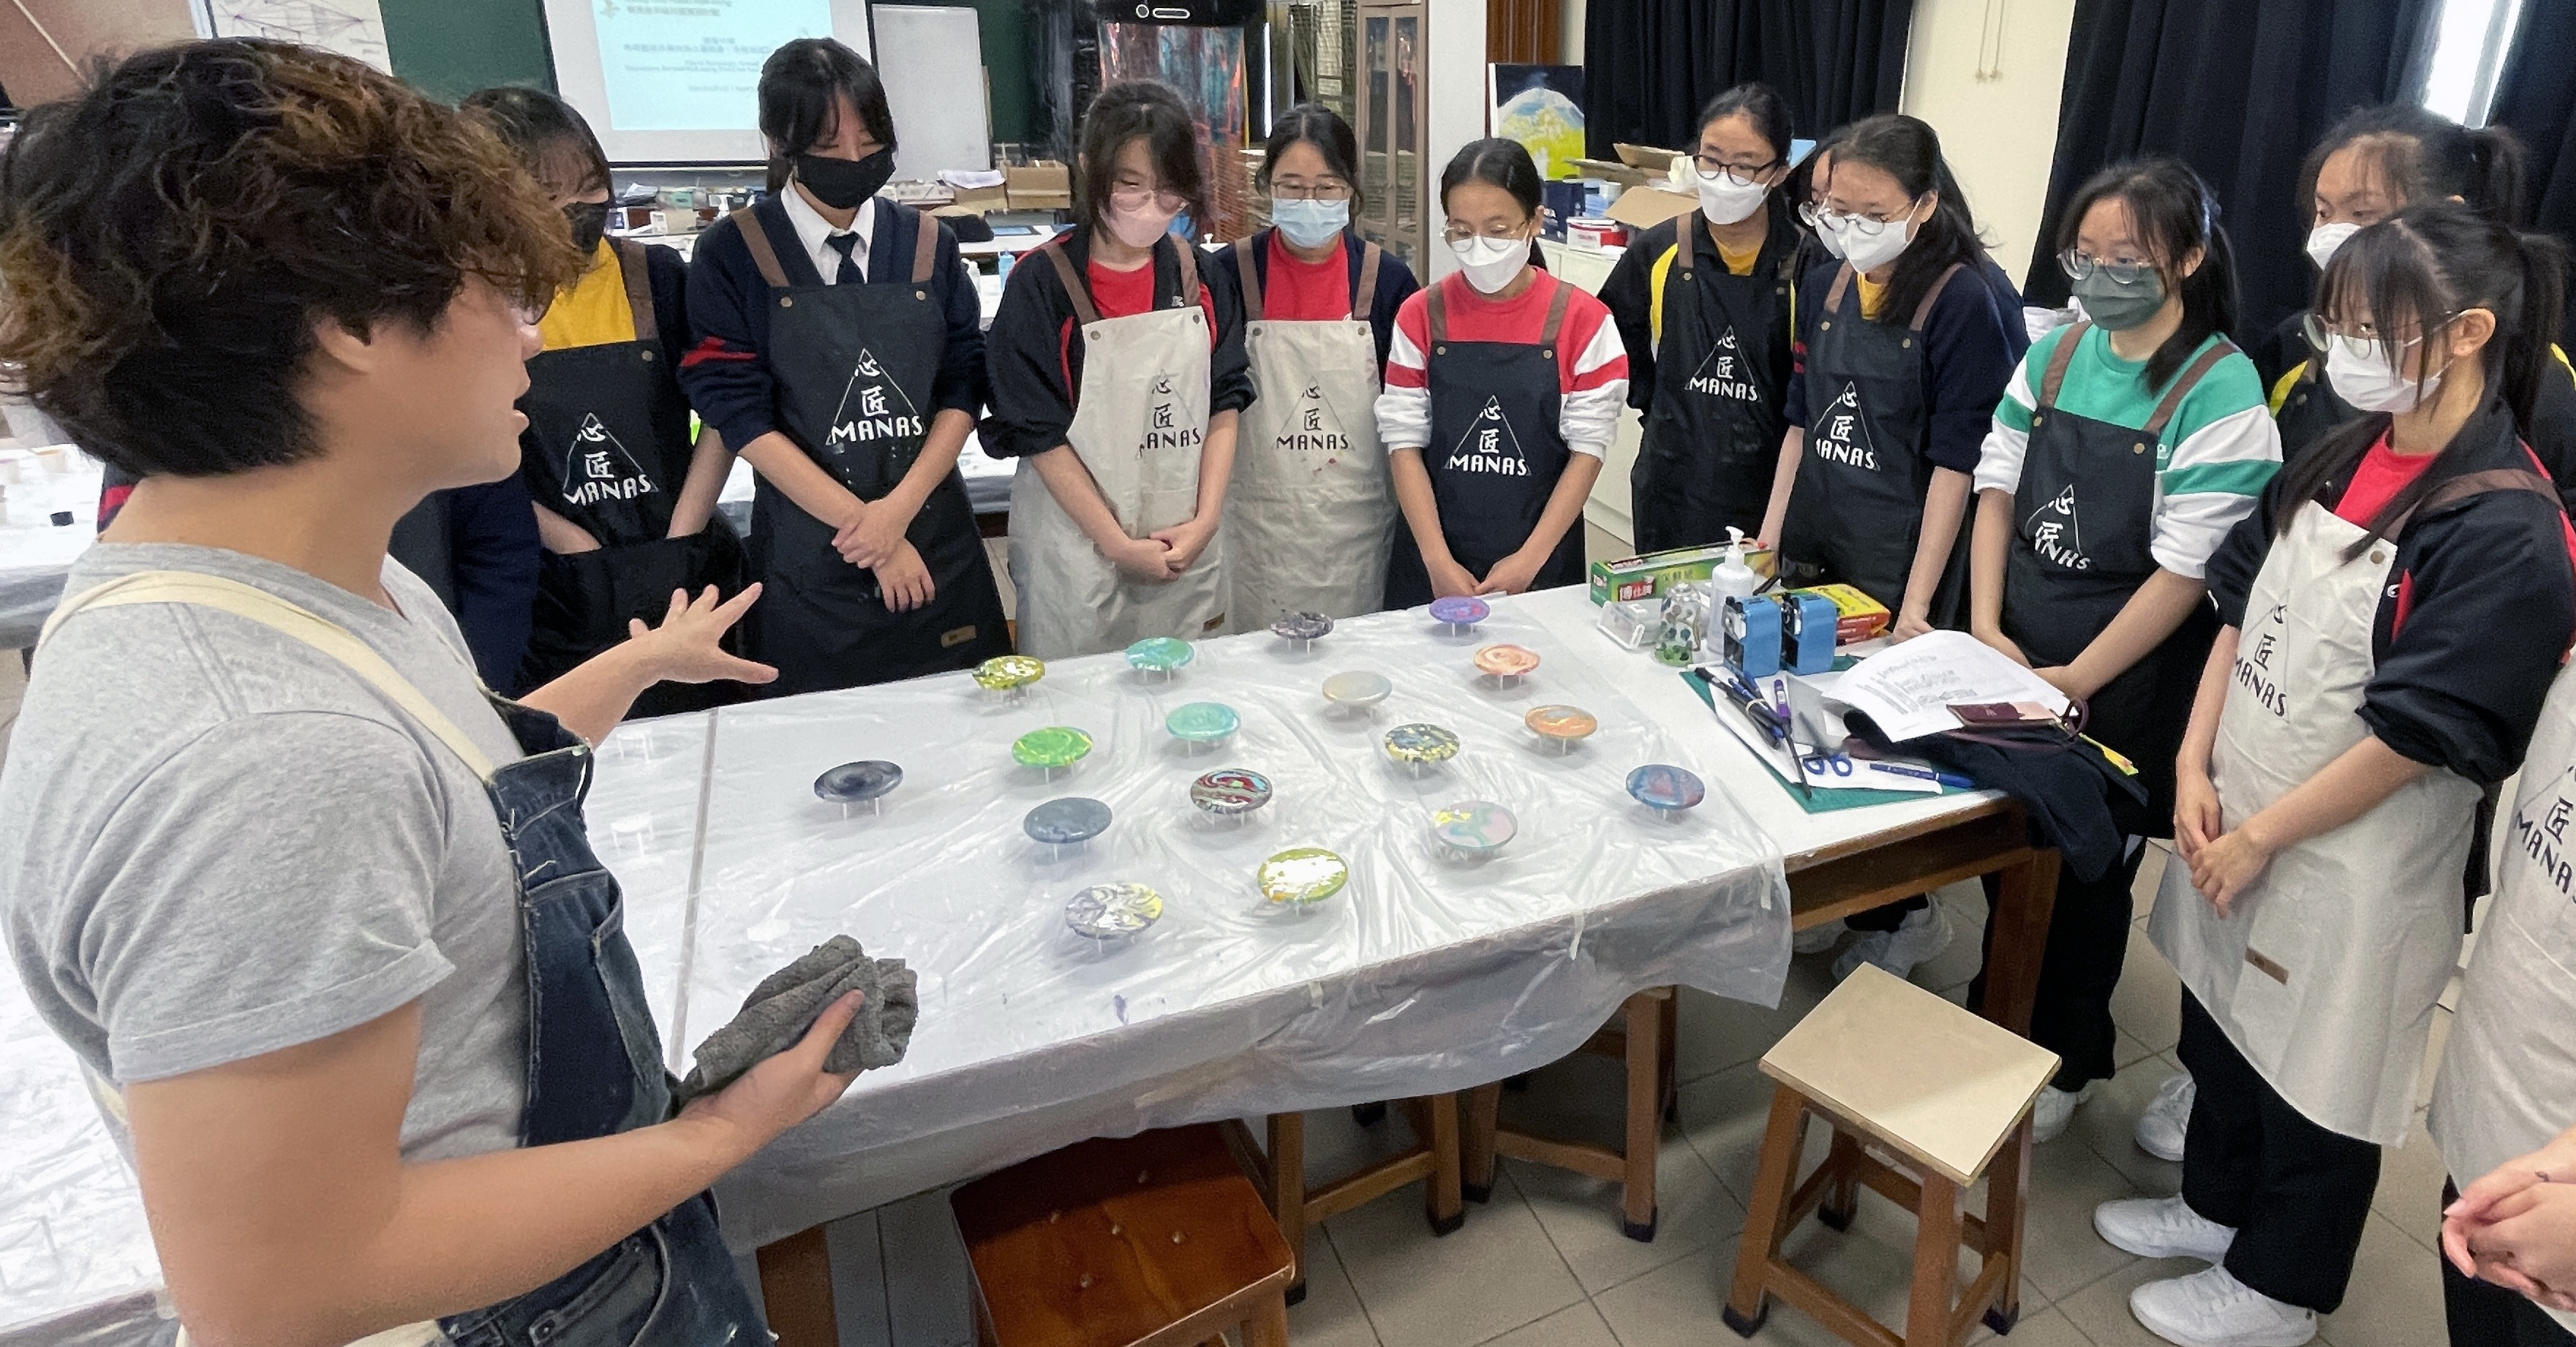 A group of people wearing masks and standing around a tableDescription automatically generated